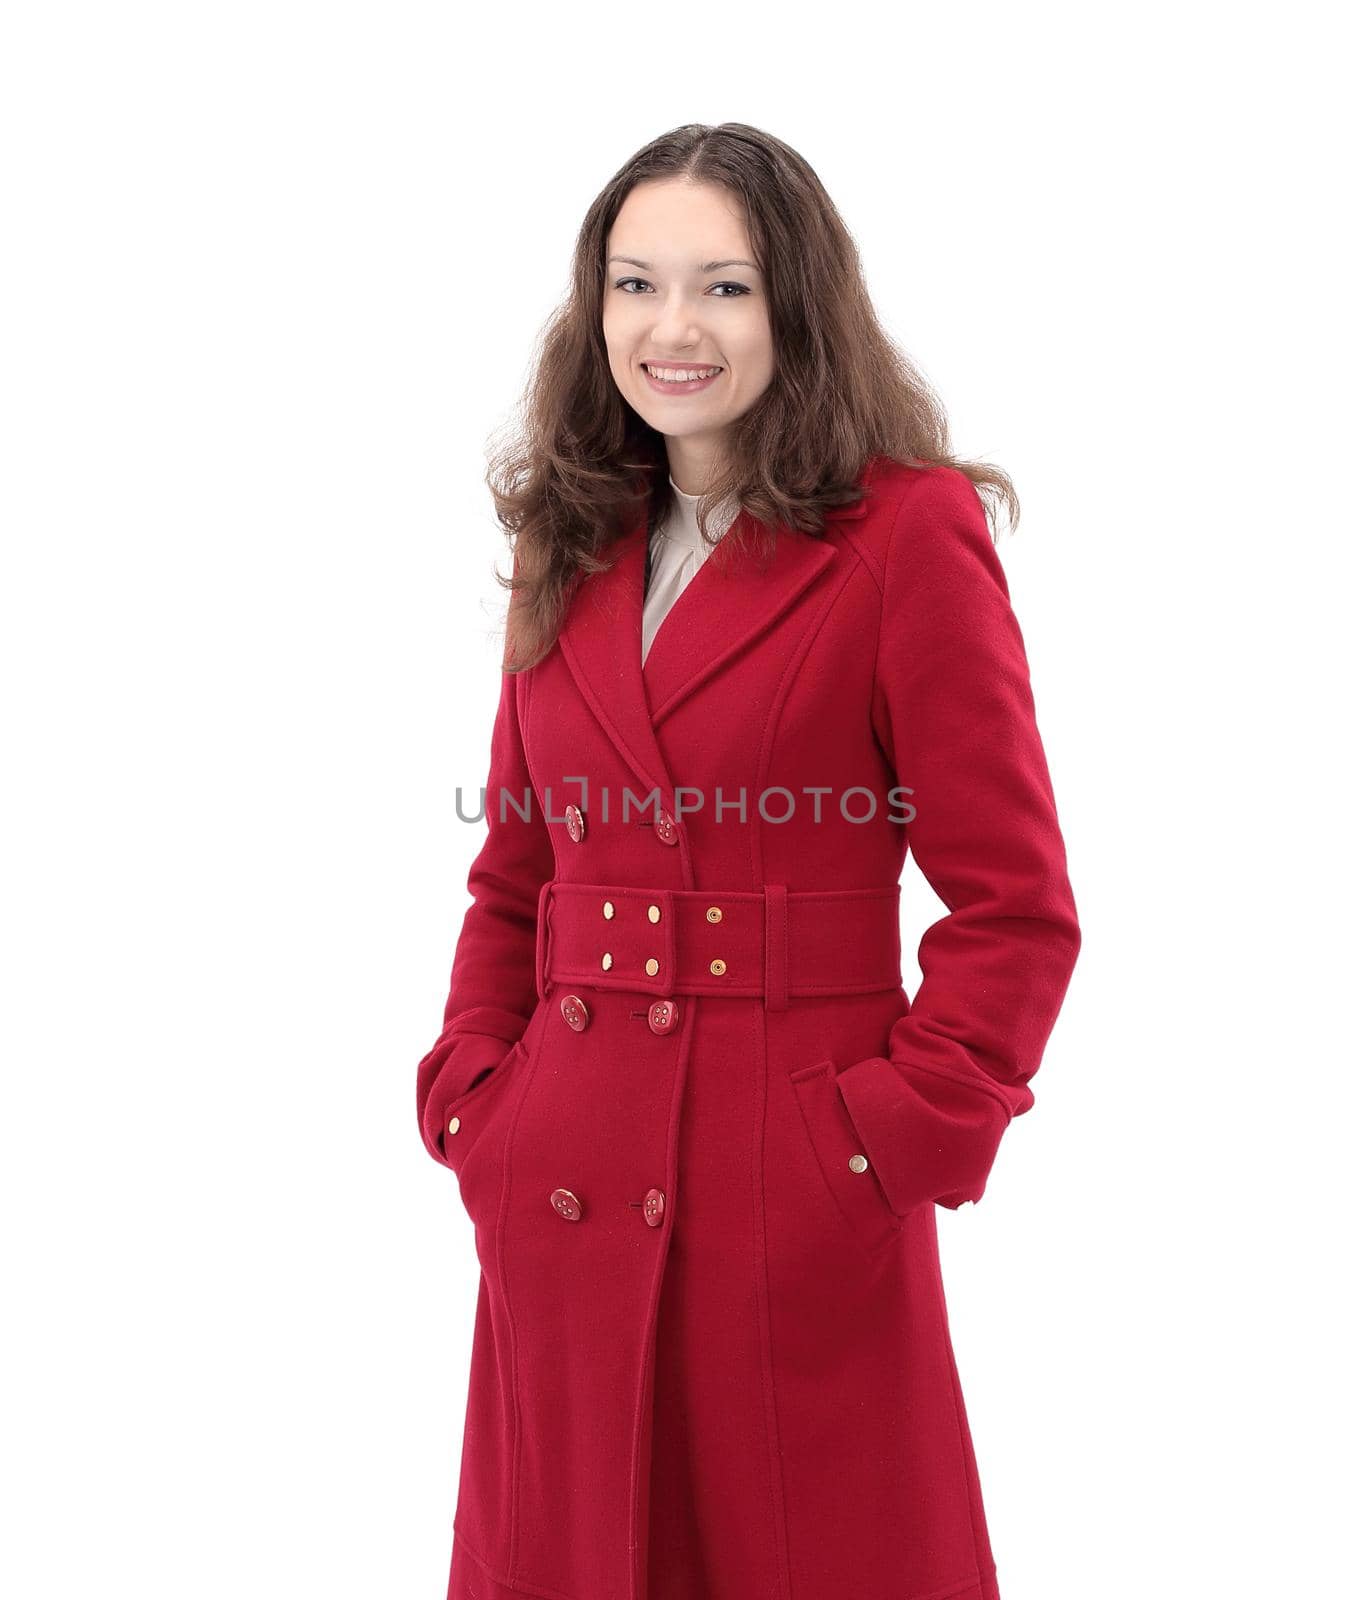 closeup.portrait of a smiling young woman in red coat.isolated on white.